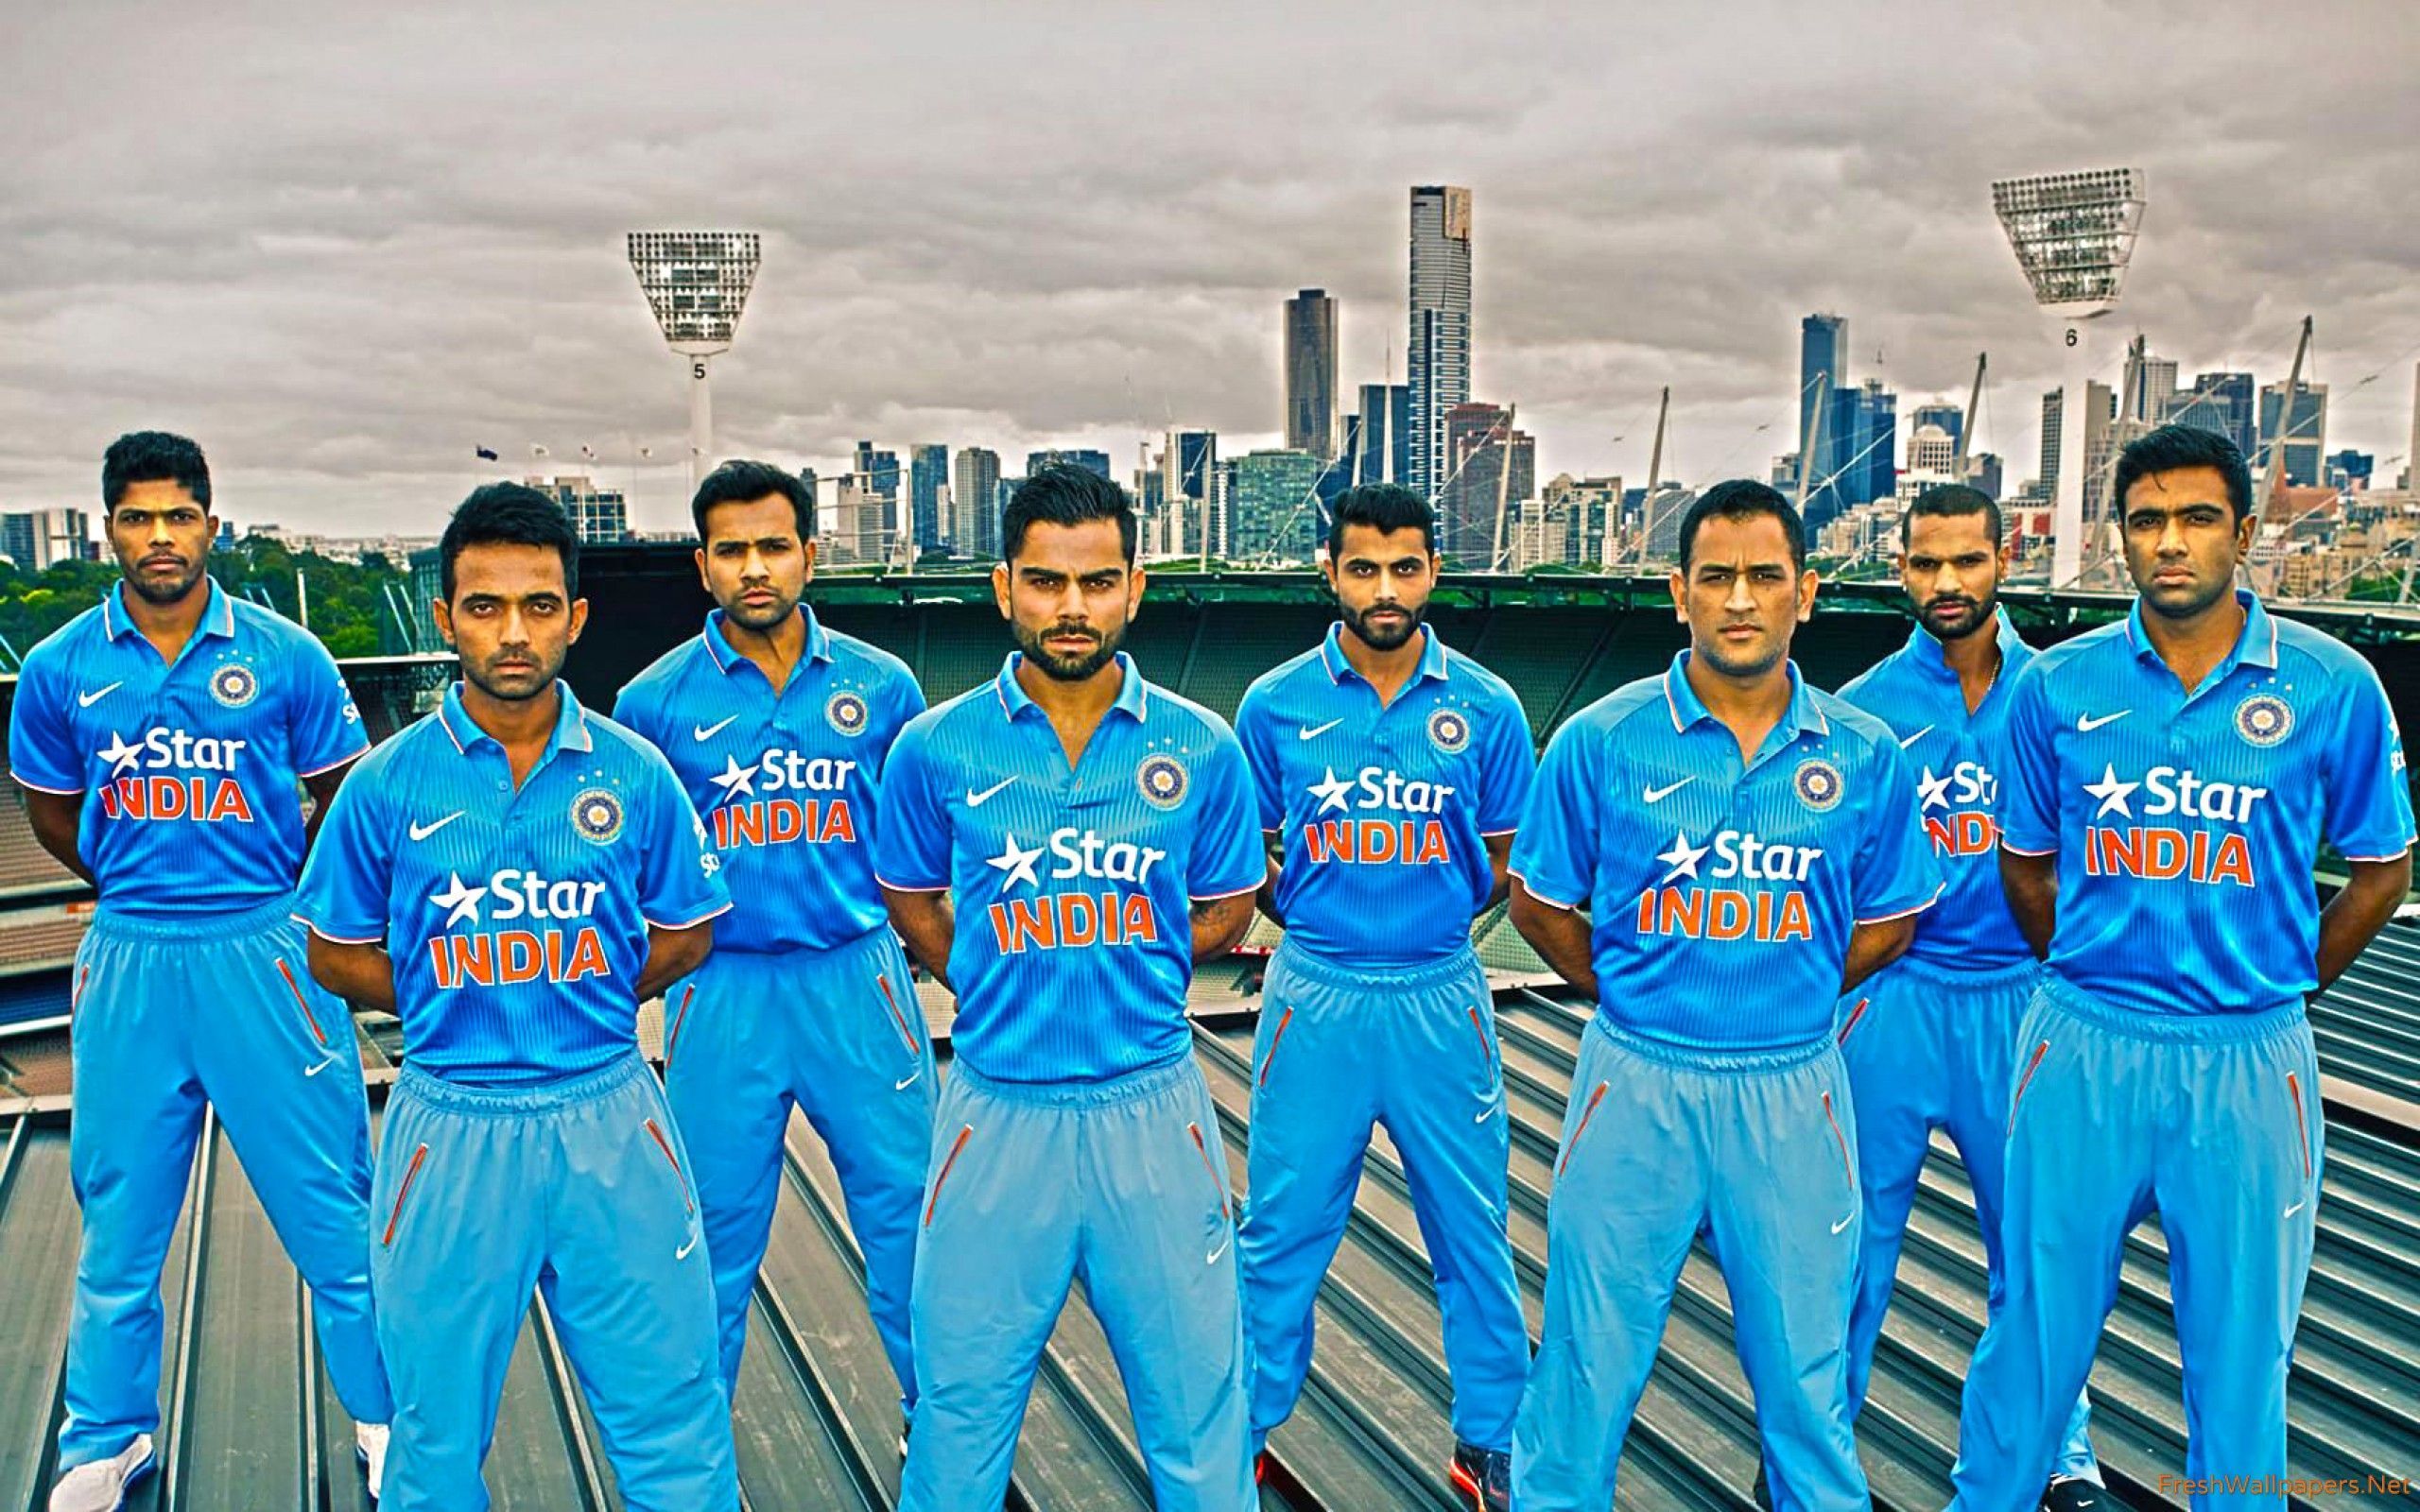 Indian Cricket Team Full HD Quality Image, Indian World Cup Indian Team